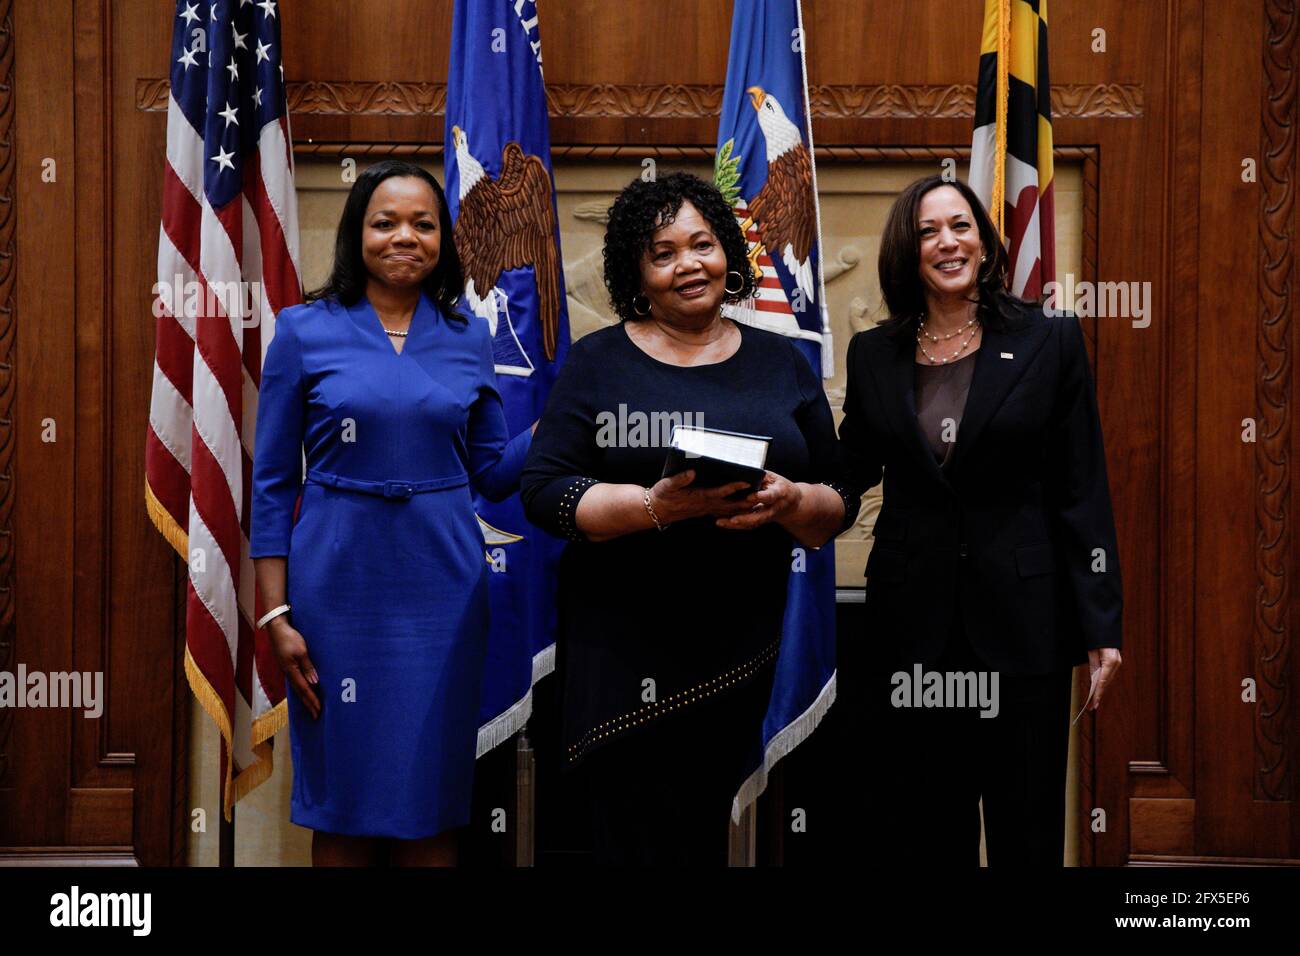 Kristen Clarke (L) stands next to her mother Pansy Clarke during her swearing in ceremony as Assistant Attorney General for the Civil Rights Division by U.S. Vice President Kamala Harris (R), at the Department of Justice in Washington, U.S., May 25, 2021. REUTERS/Yuri Gripas Stock Photo